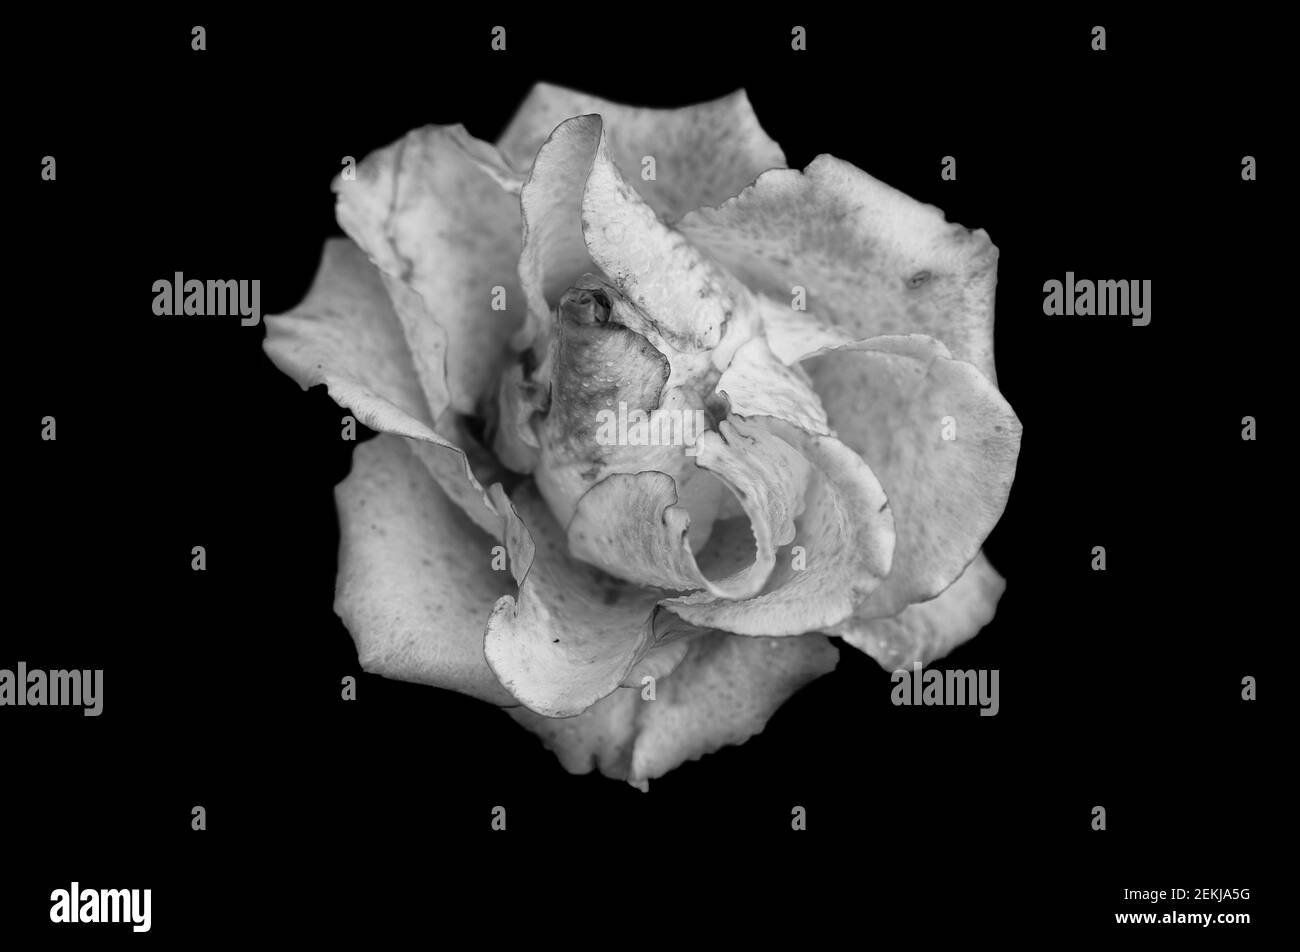 Close up of rose blossom on black background Stock Photo